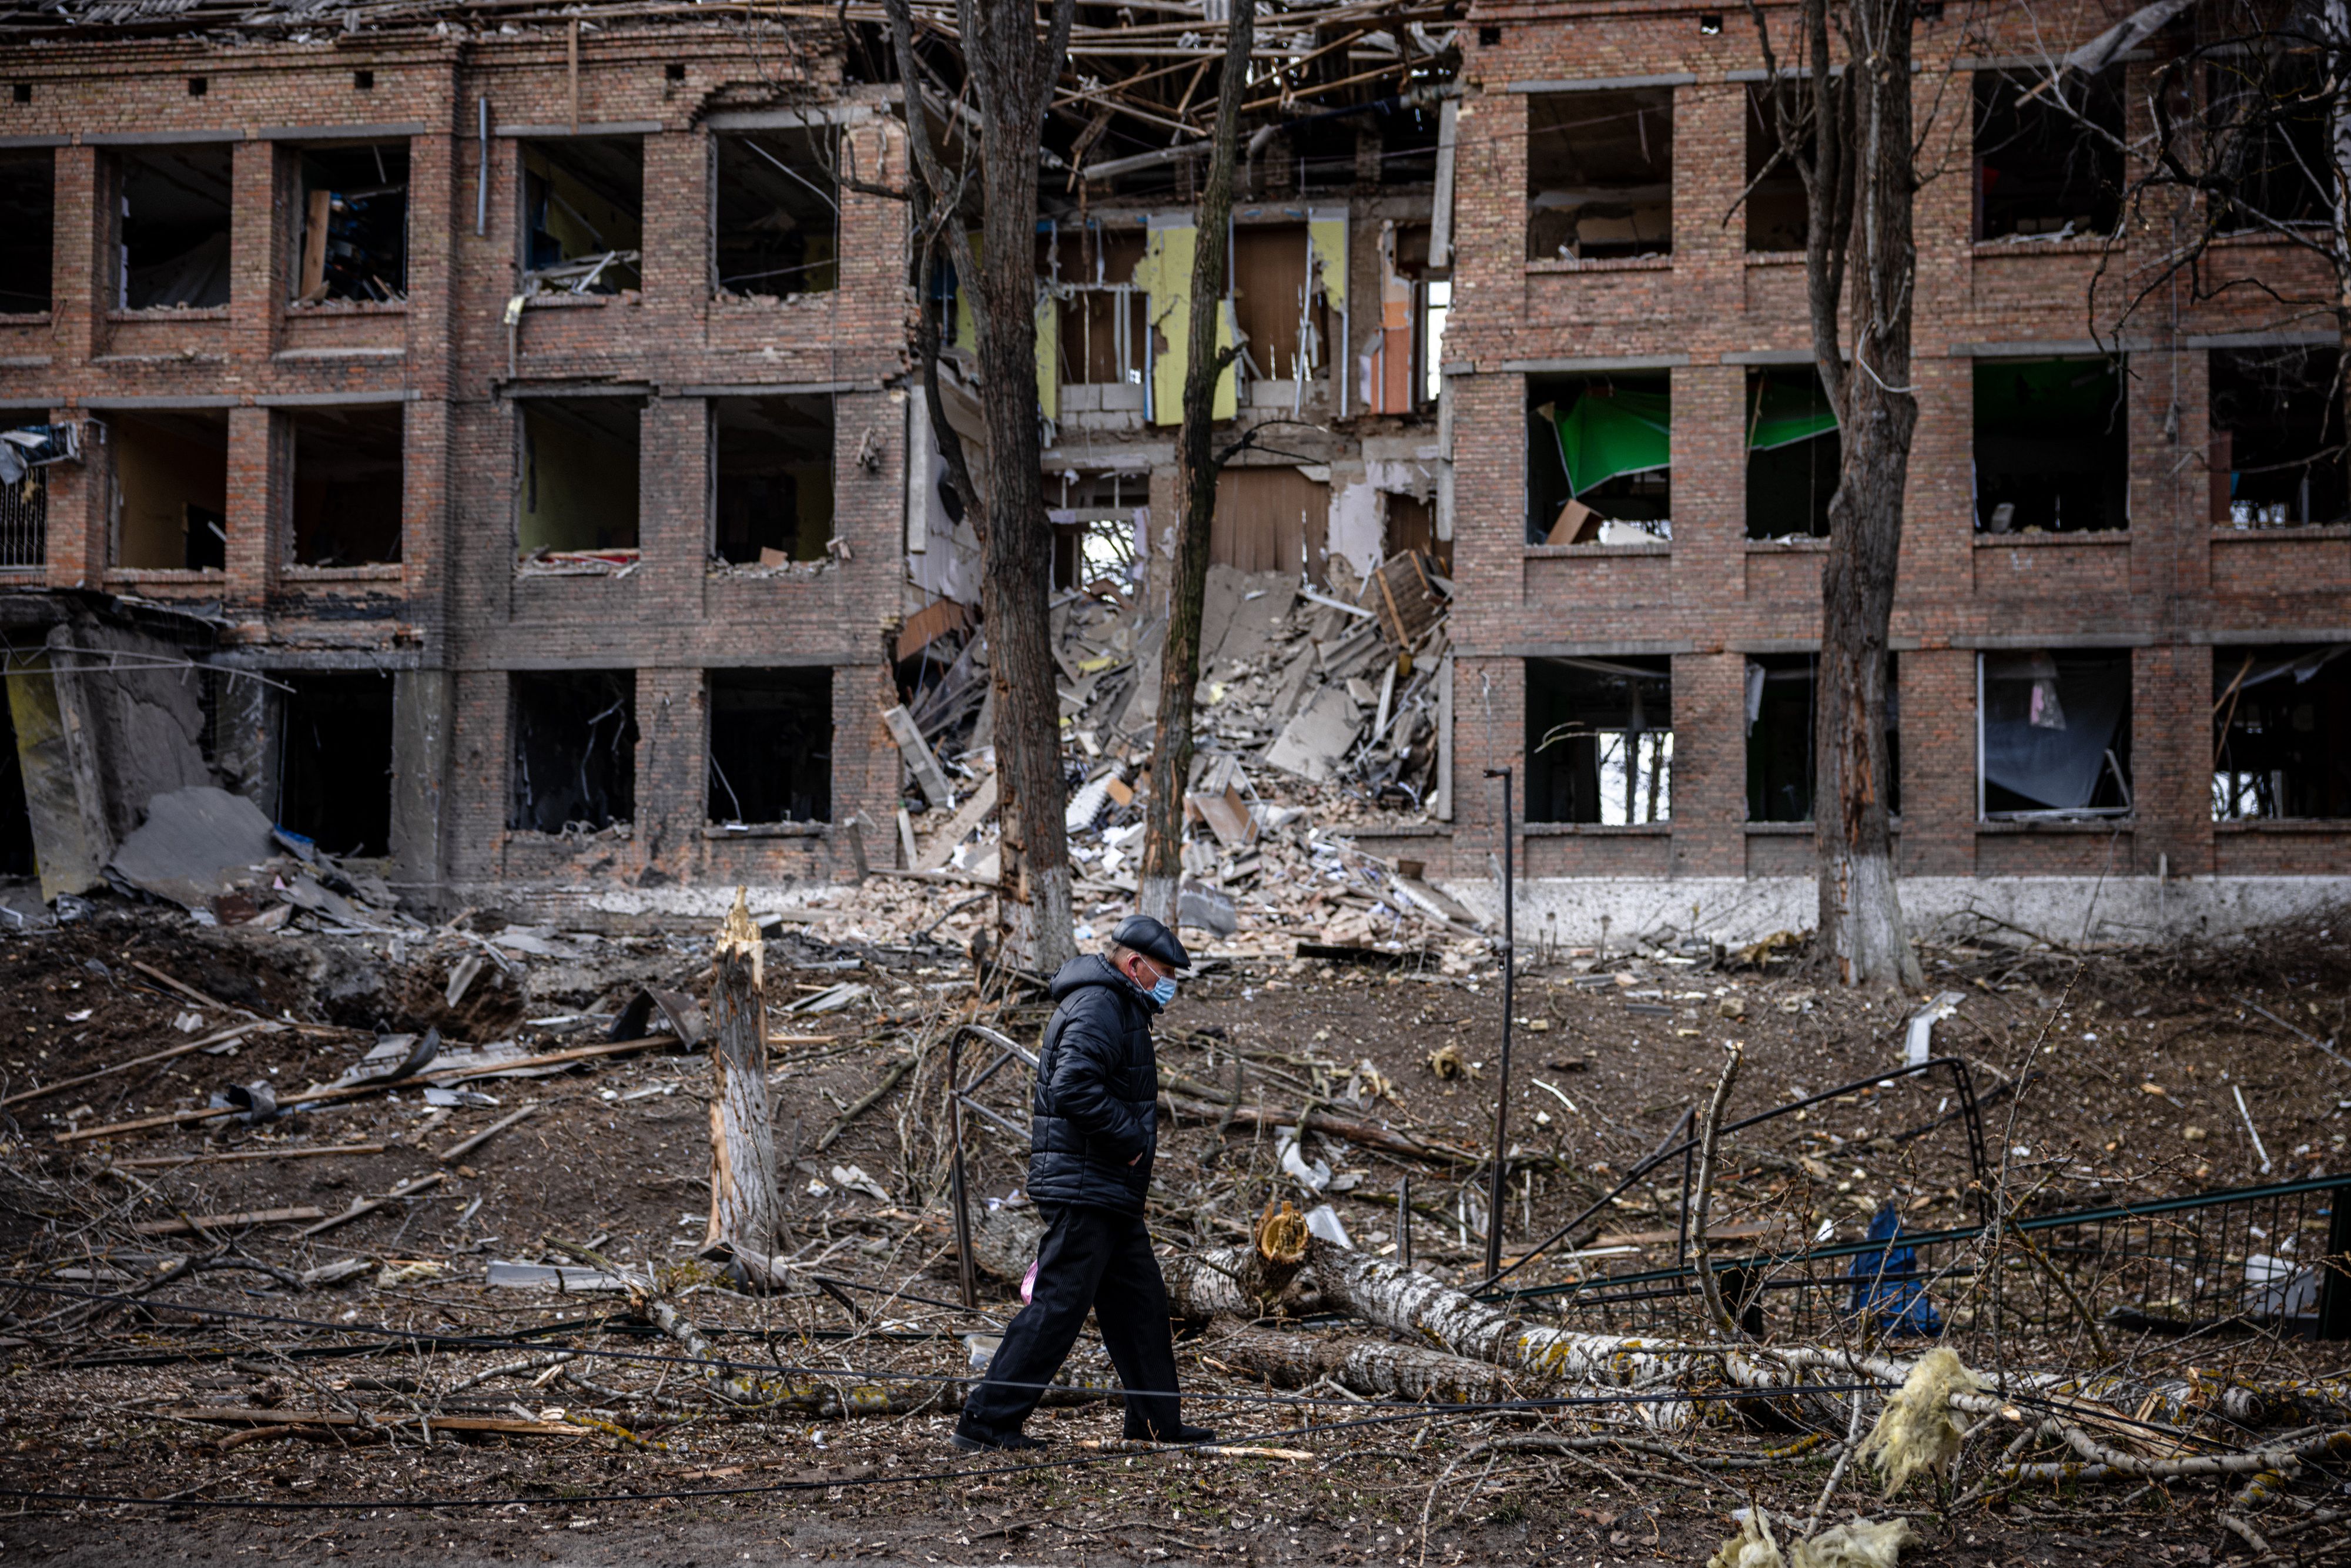 A man walks in front of a destroyed building after a Russian missile attack near Kyiv on 27 February